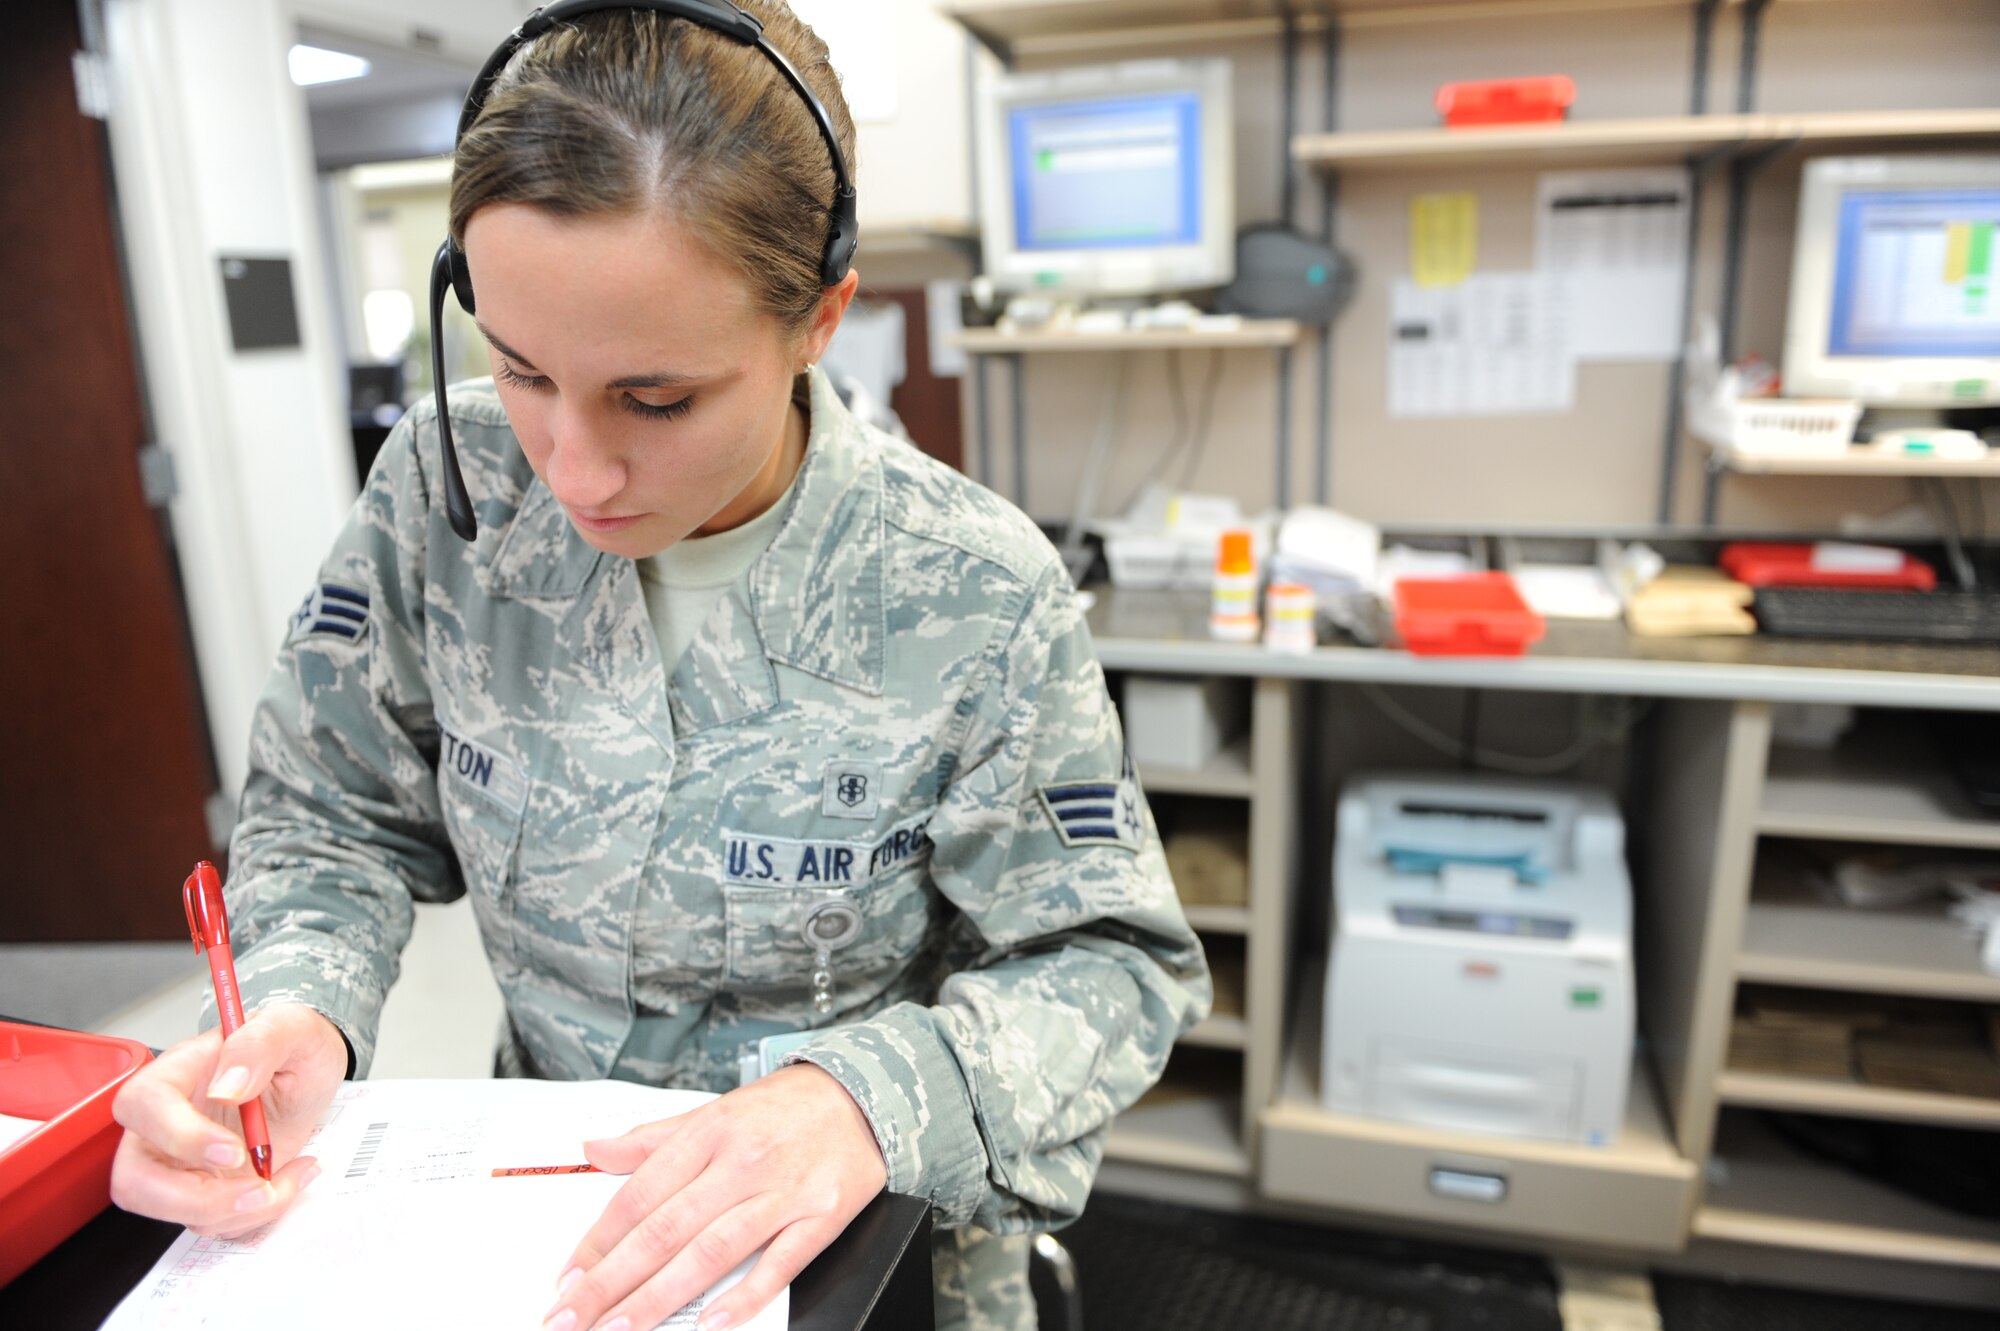 U.S. Air Force Senior Airman Sarah Patton, 7th Medical Support Squadron pharmacy technician, takes a customer’s question, while preparing paperwork for the patient’s medication at the Dyess pharmacy, Oct. 18, 2013, at Dyess Air Force Base, Texas.  Pharmacy technicians record paperwork by hand or electronically. (U.S. Air Force photo by Airman 1st Class Kedesha Pennant)